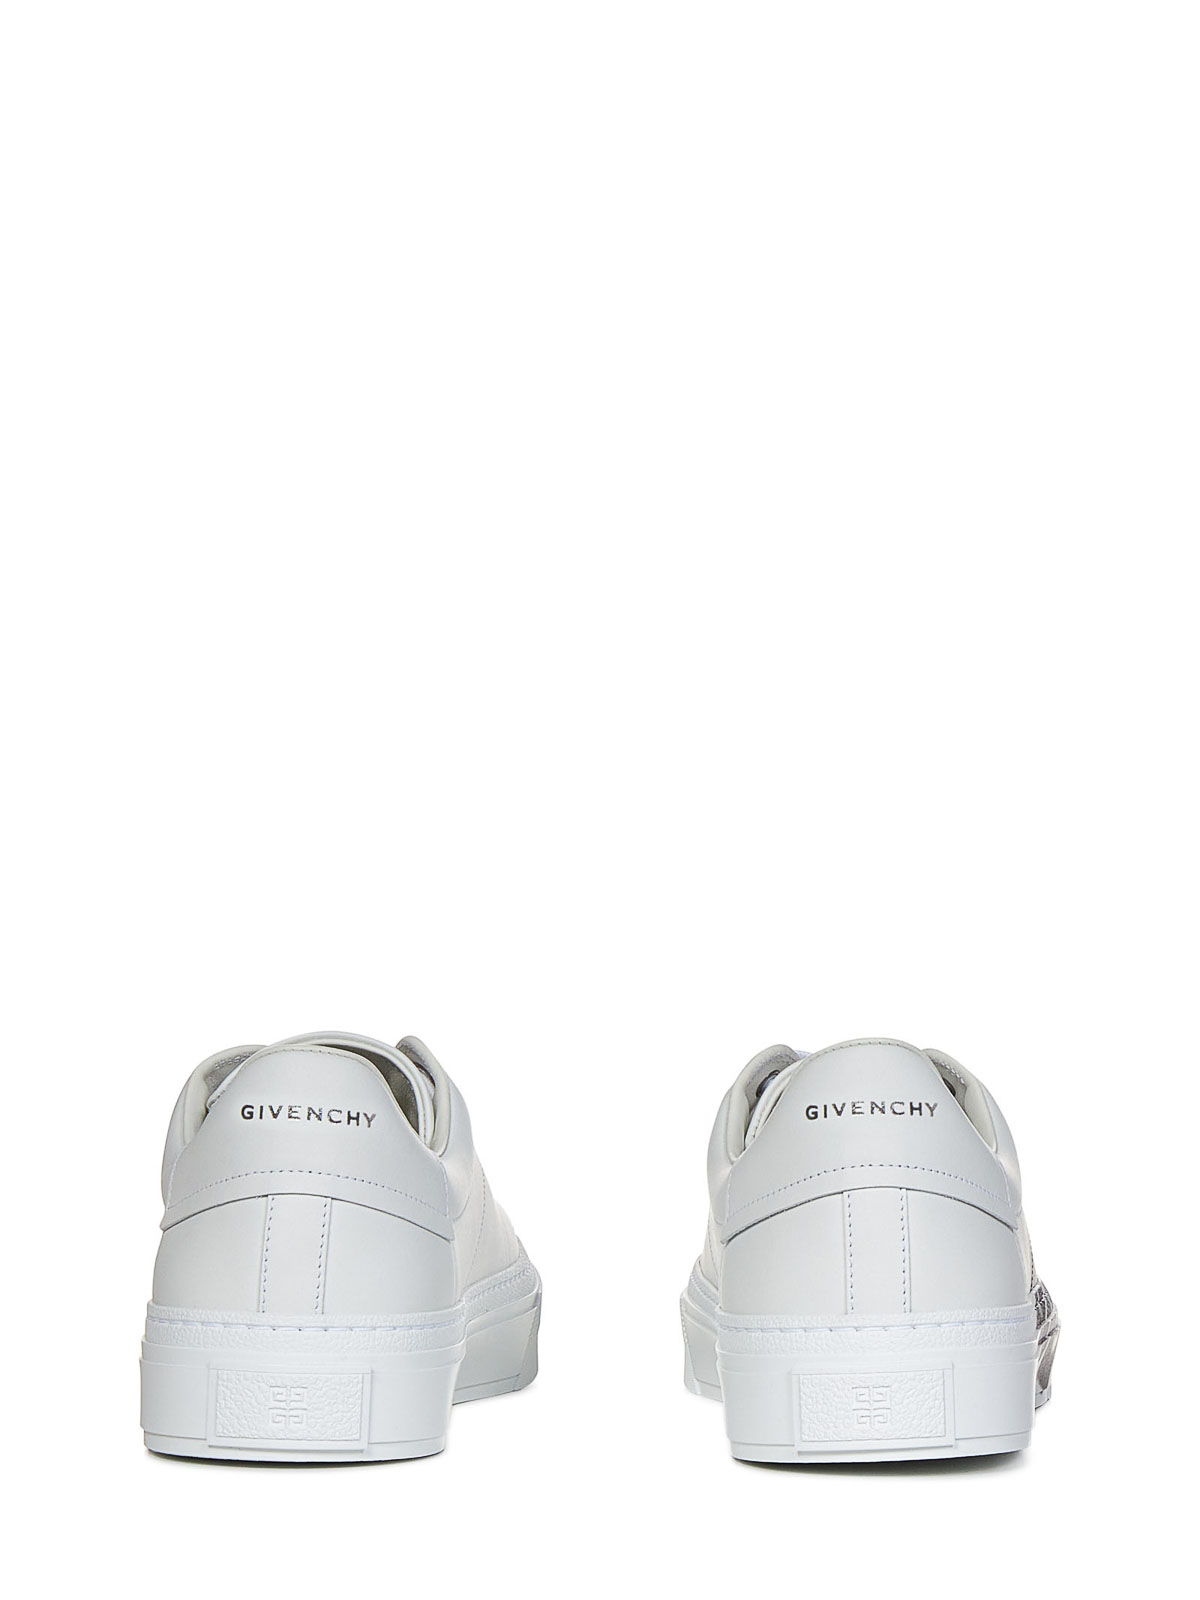 Shop Givenchy Graffiti Sneakers In White